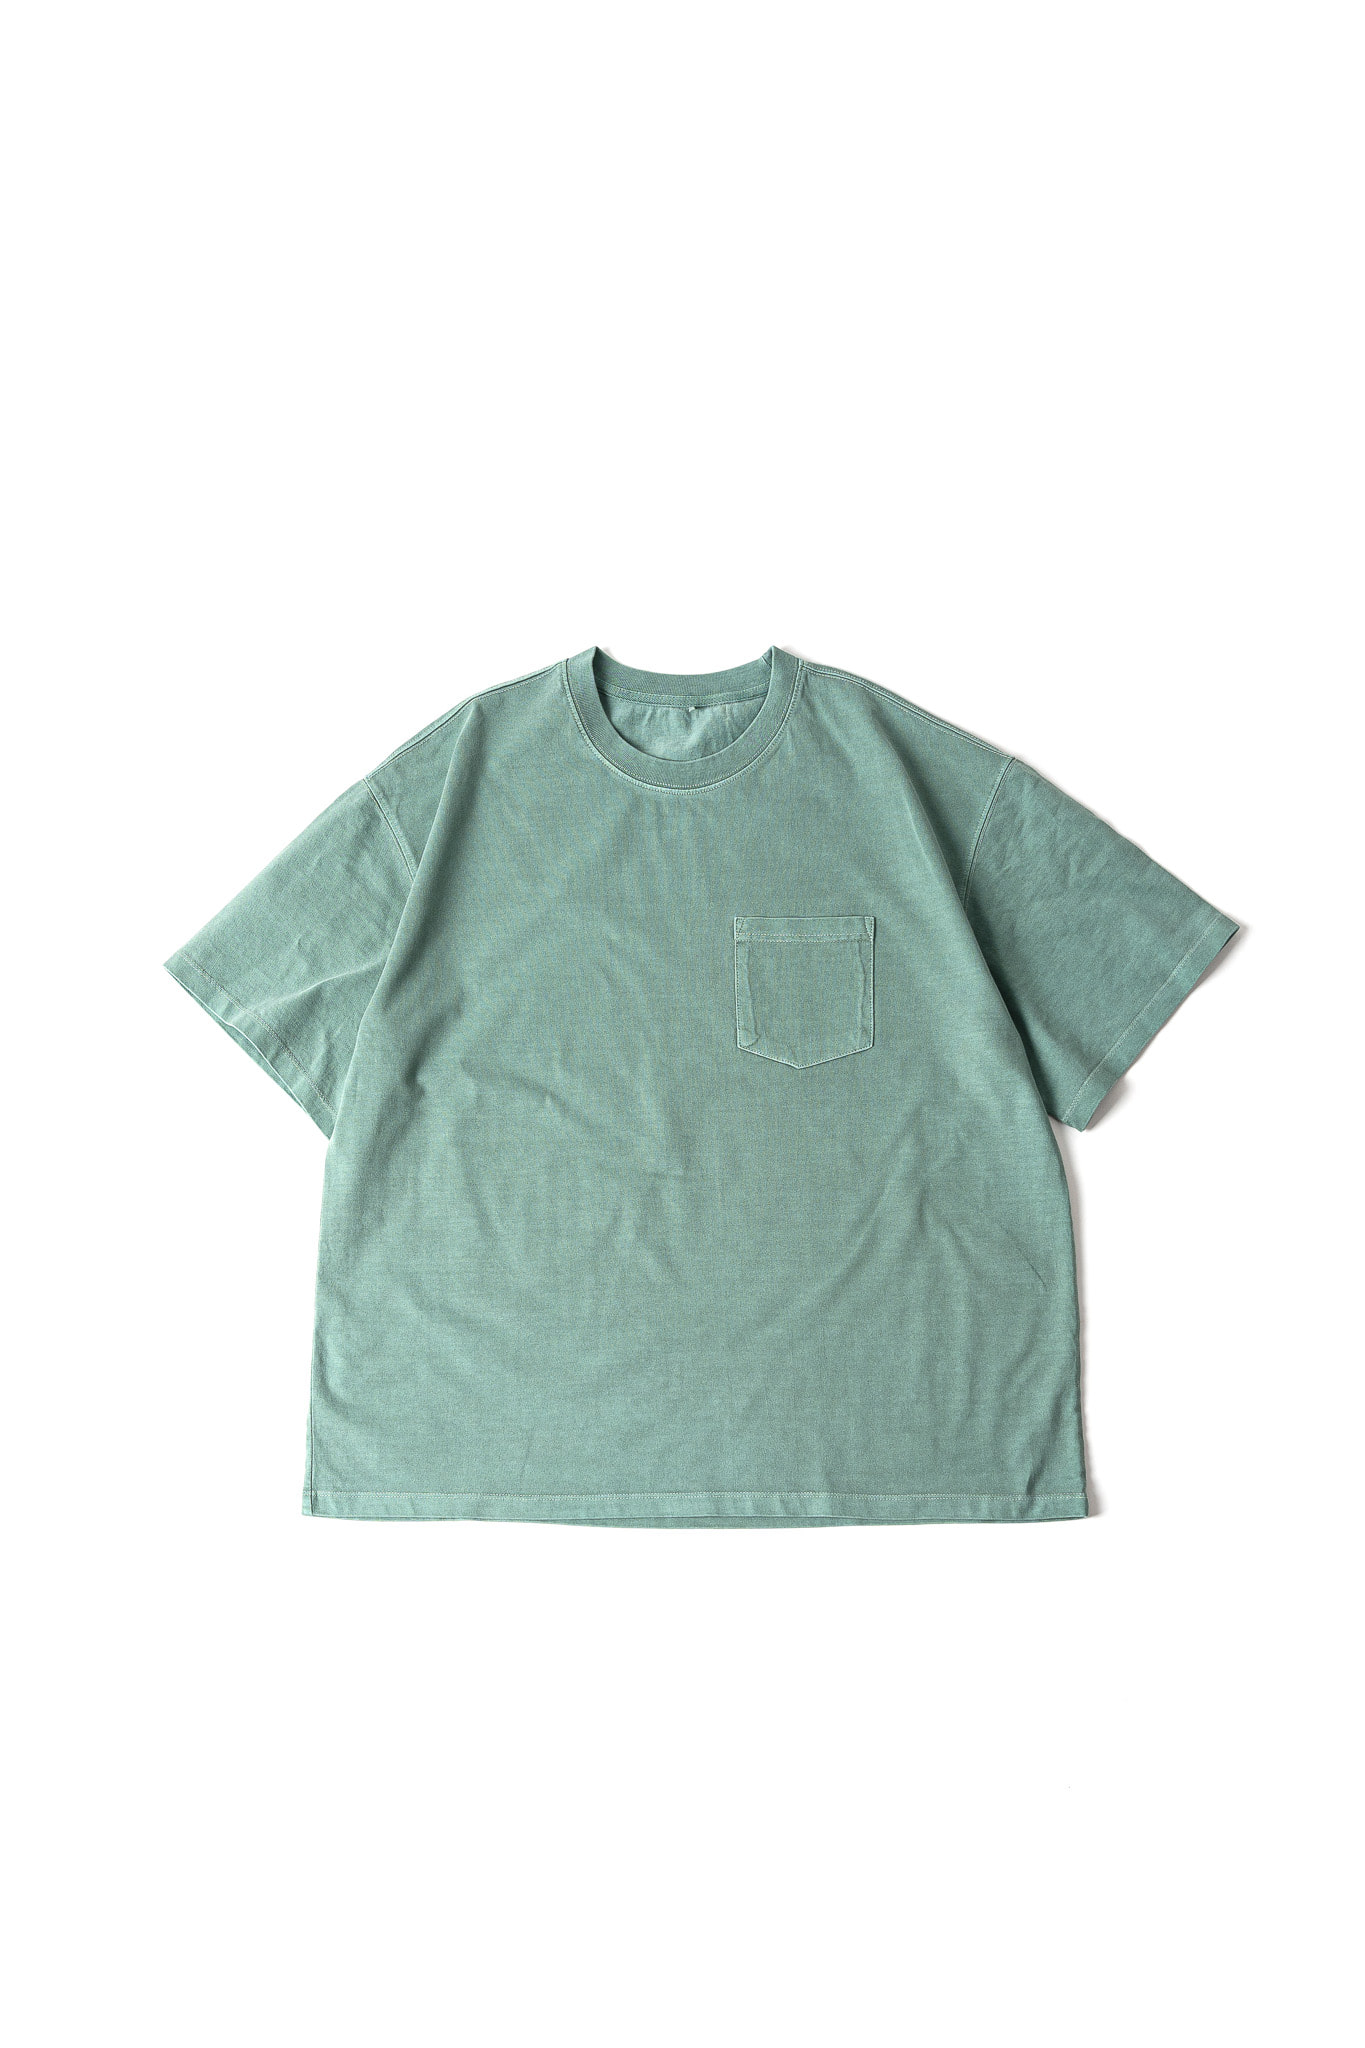 NONCARE T SHIRTS - VINTAGE GREEN